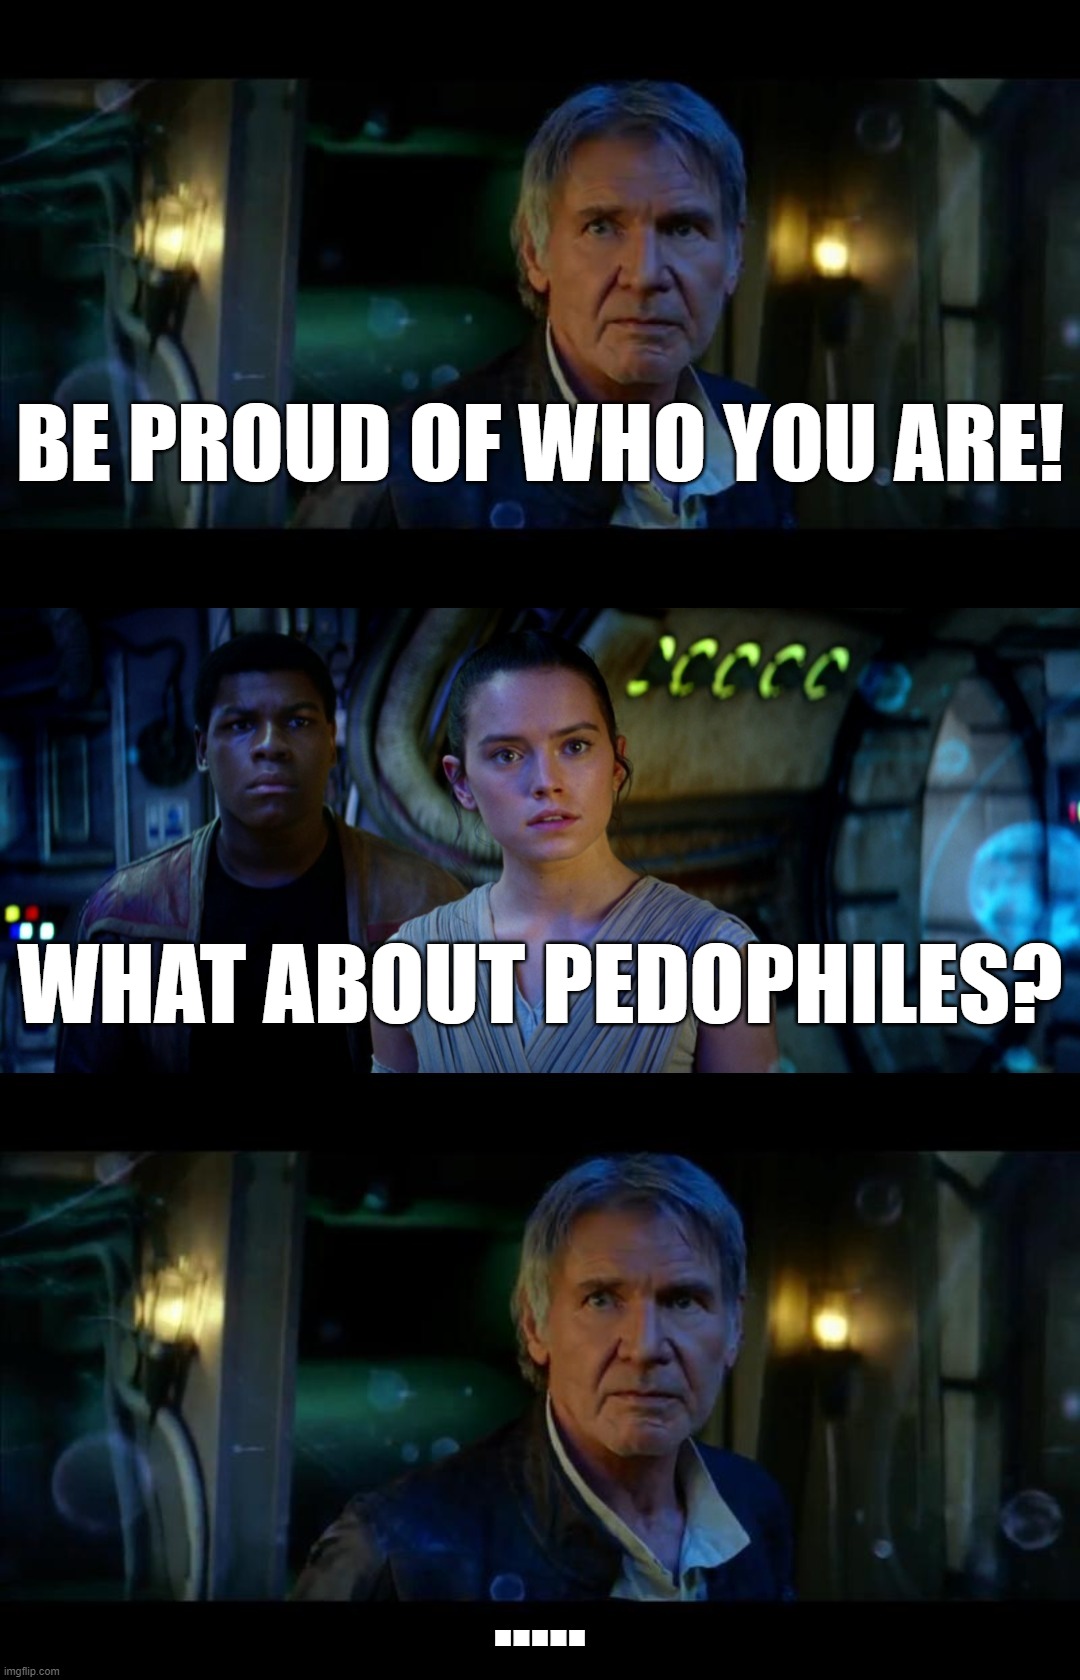 Awkward Isn't It? | BE PROUD OF WHO YOU ARE! WHAT ABOUT PEDOPHILES? ..... | image tagged in memes,it's true all of it han solo,proud,gay,lgbt,pedophile | made w/ Imgflip meme maker